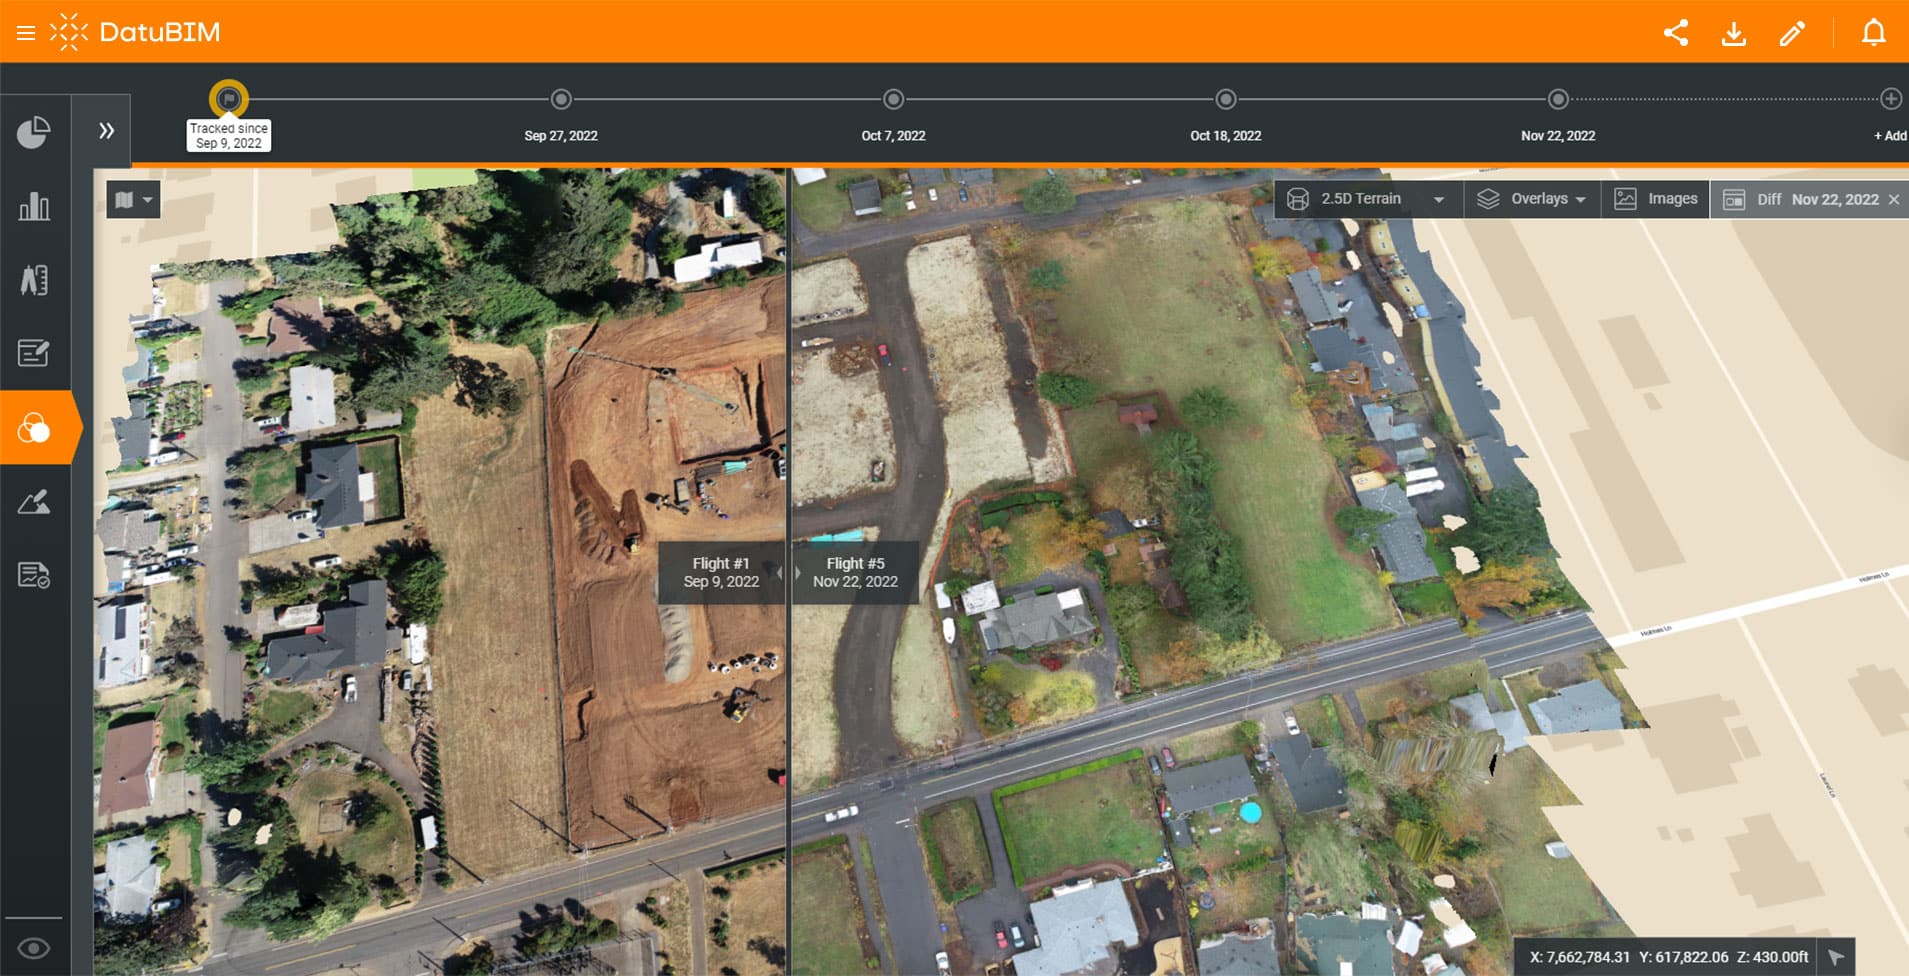 Manage and monitor site operations efficiently with photogrammetry and drone mapping software